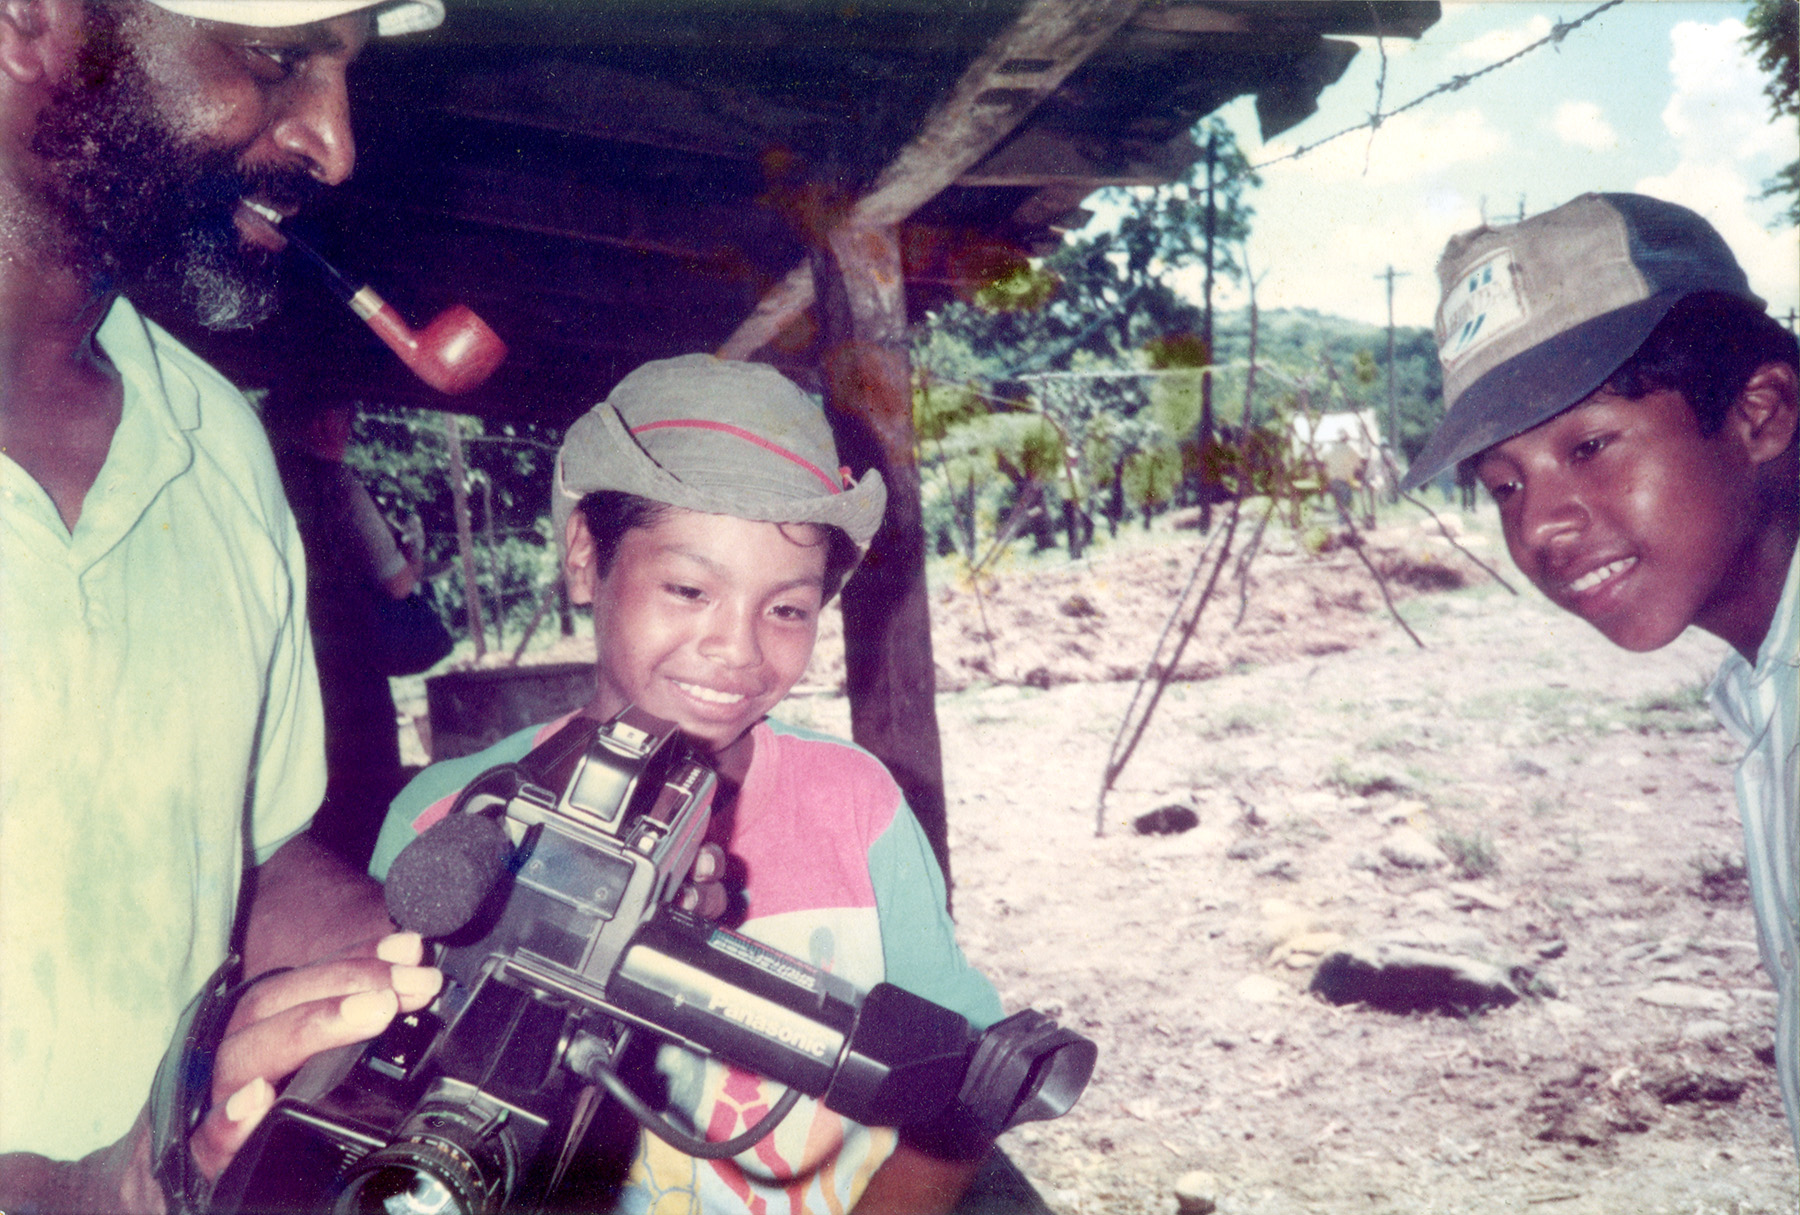 Cedric Robinson shows two children how to use a video camera in Nicaragua in the late 1980s